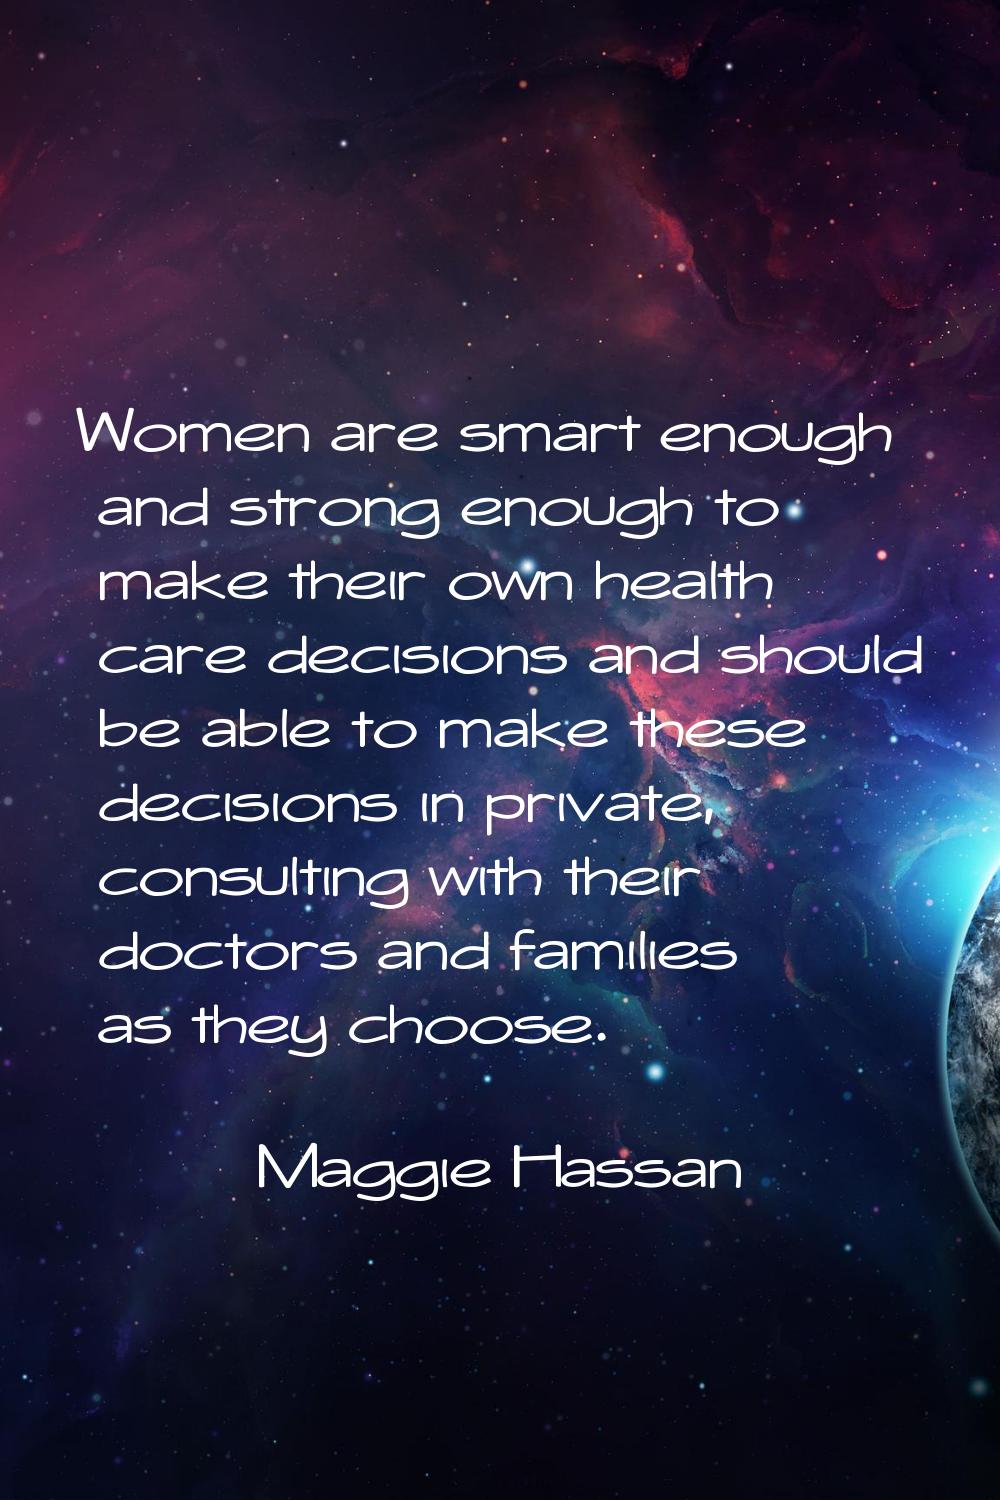 Women are smart enough and strong enough to make their own health care decisions and should be able